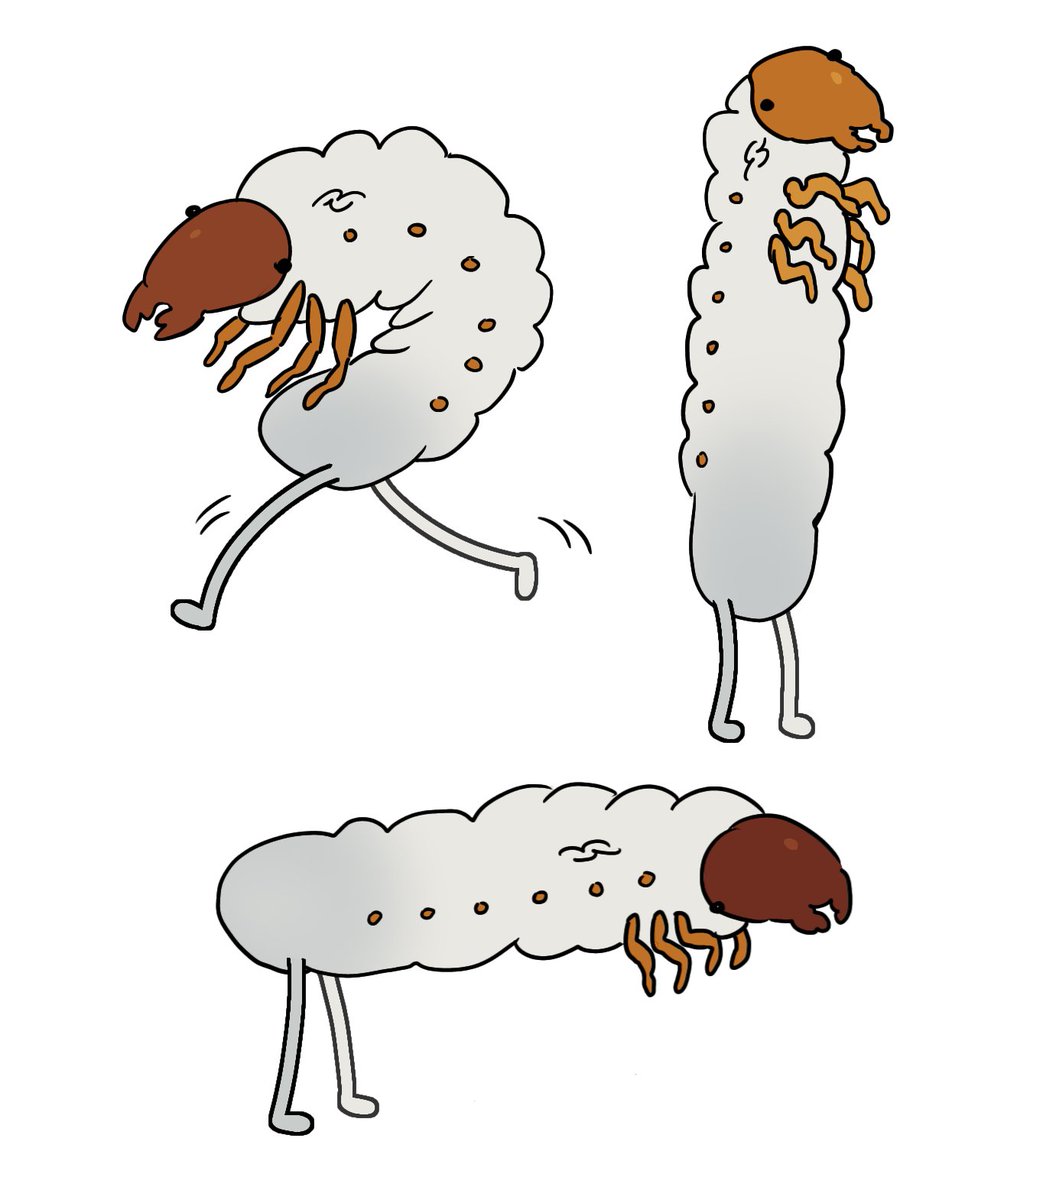 um if a grub grew legs and walked away, how would it look